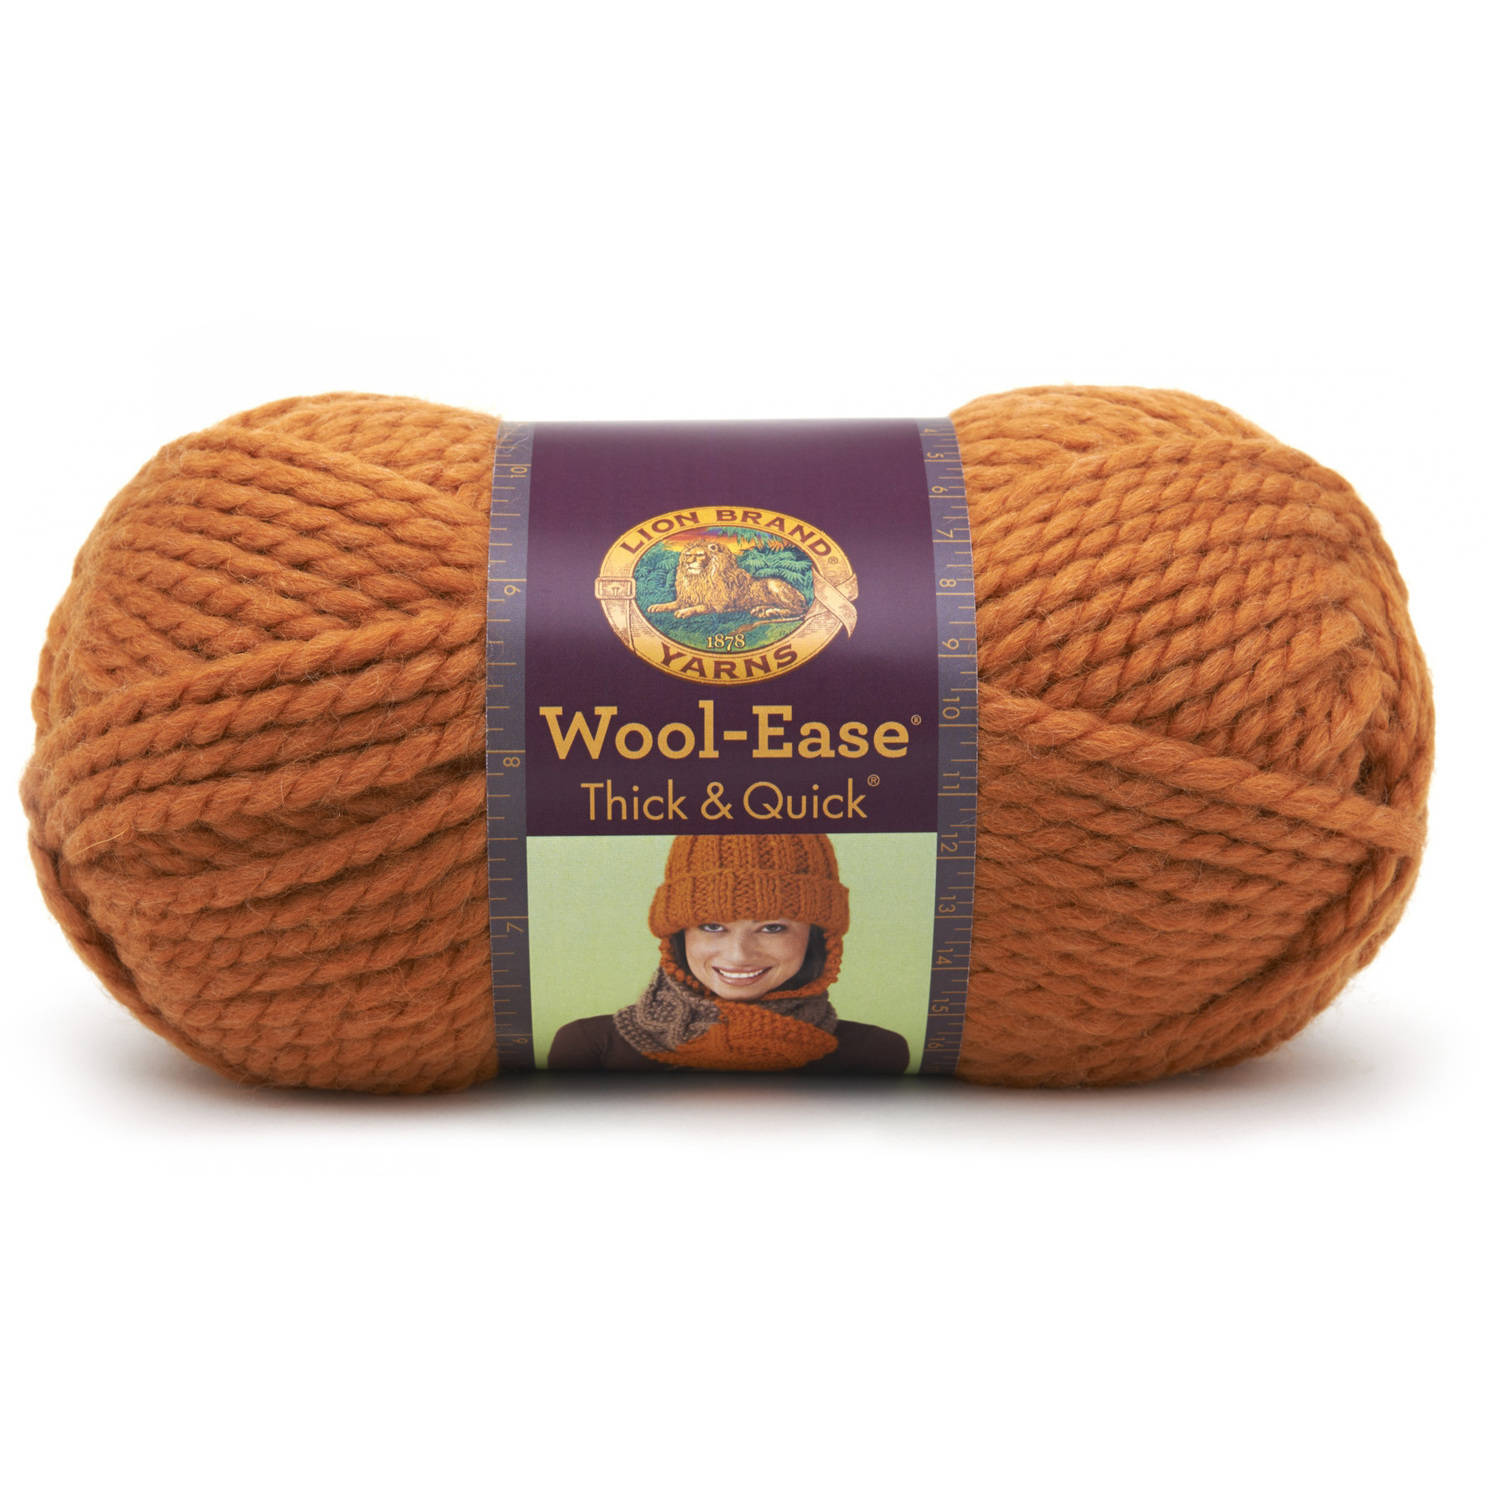 Lion Brand Yarn Wool Ease Thick & Quick Available In Multiple Colors - image 2 of 2